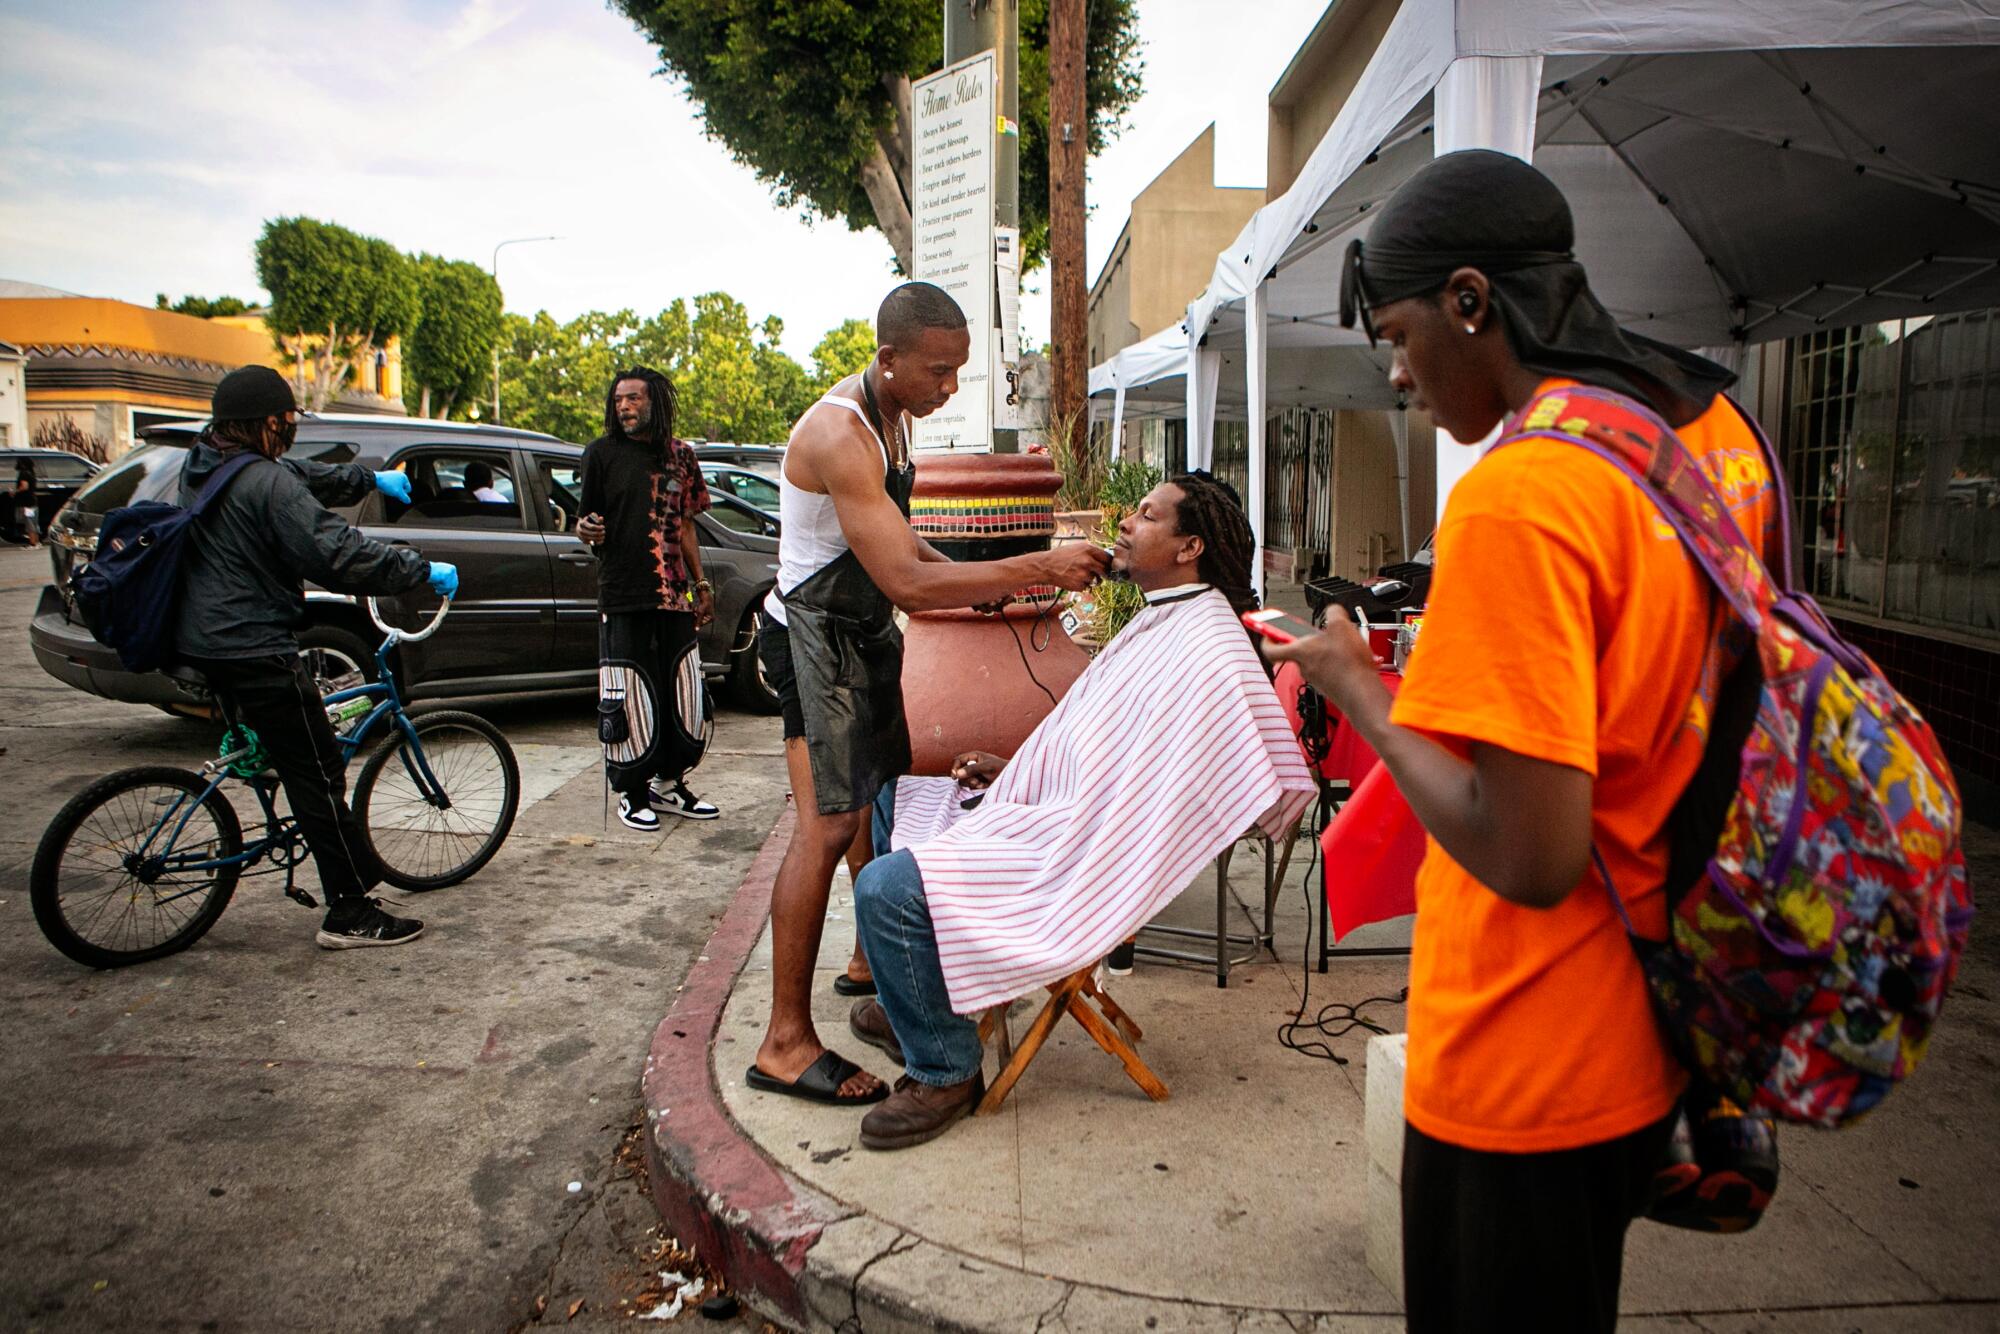 A barber gives a haircut on a street corner